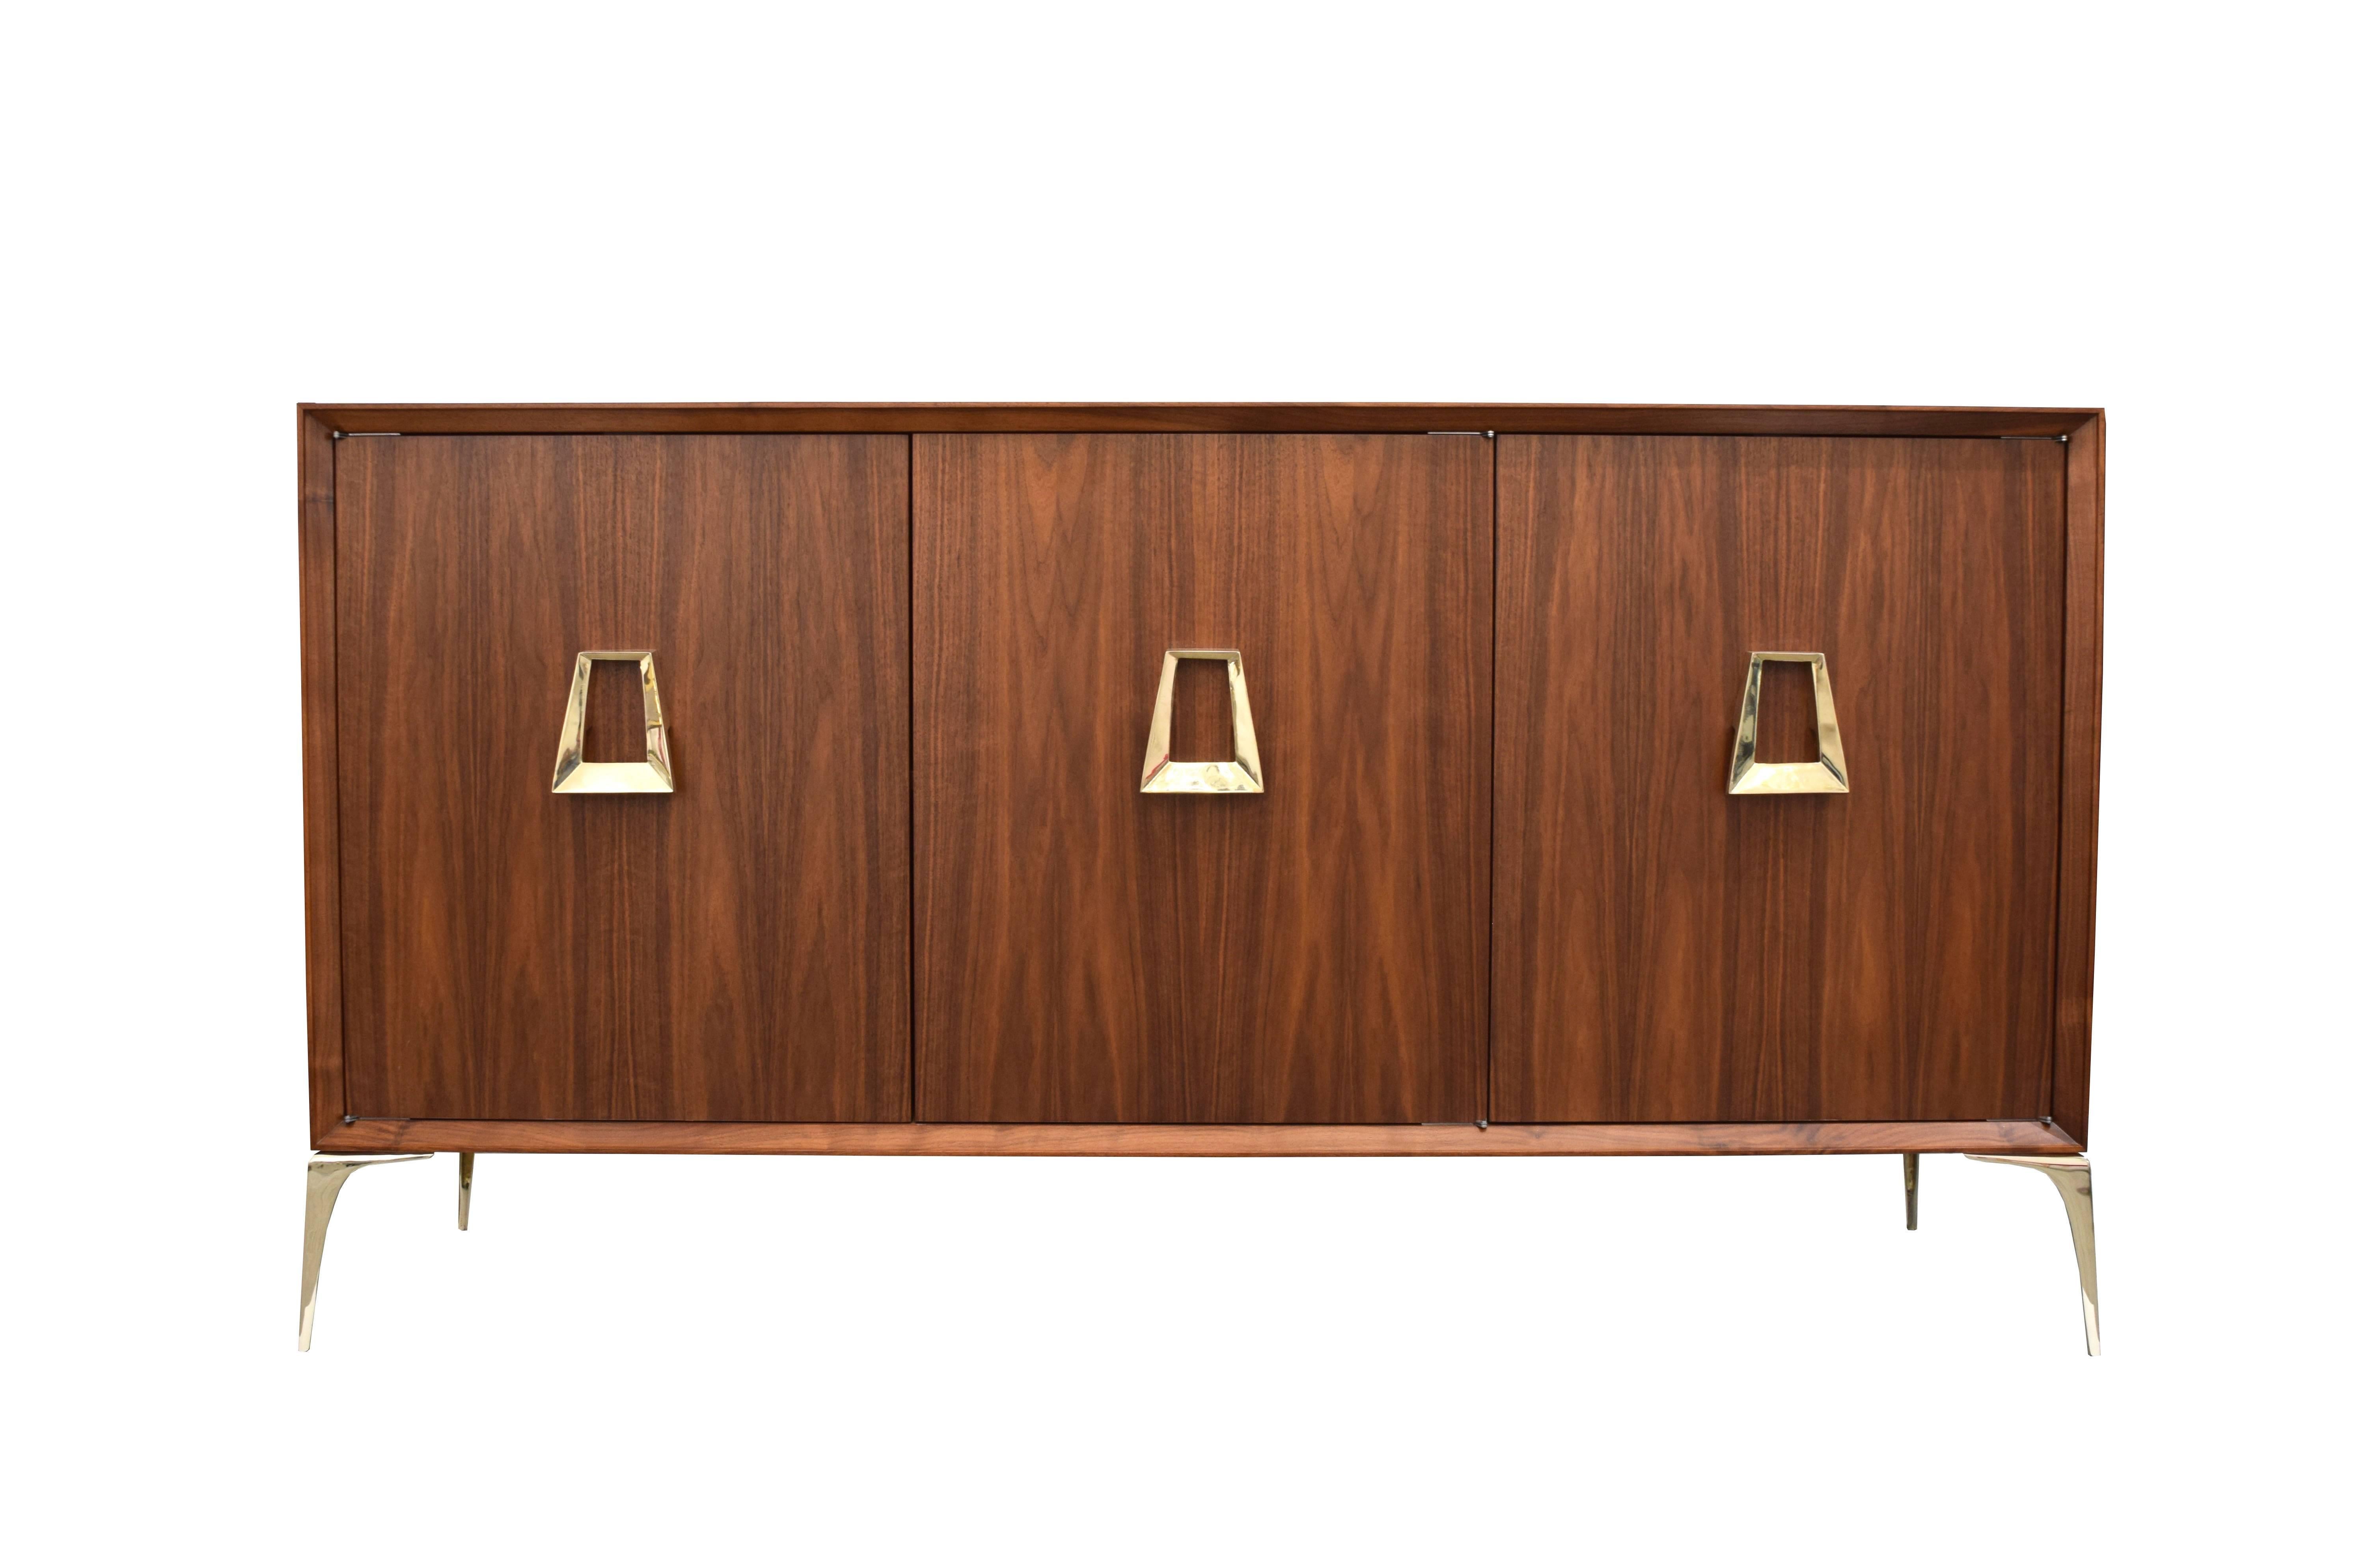 Irwin Feld Design for CF Modern presents the Stiletto credenza shown in natural walnut, with our solid brass  8